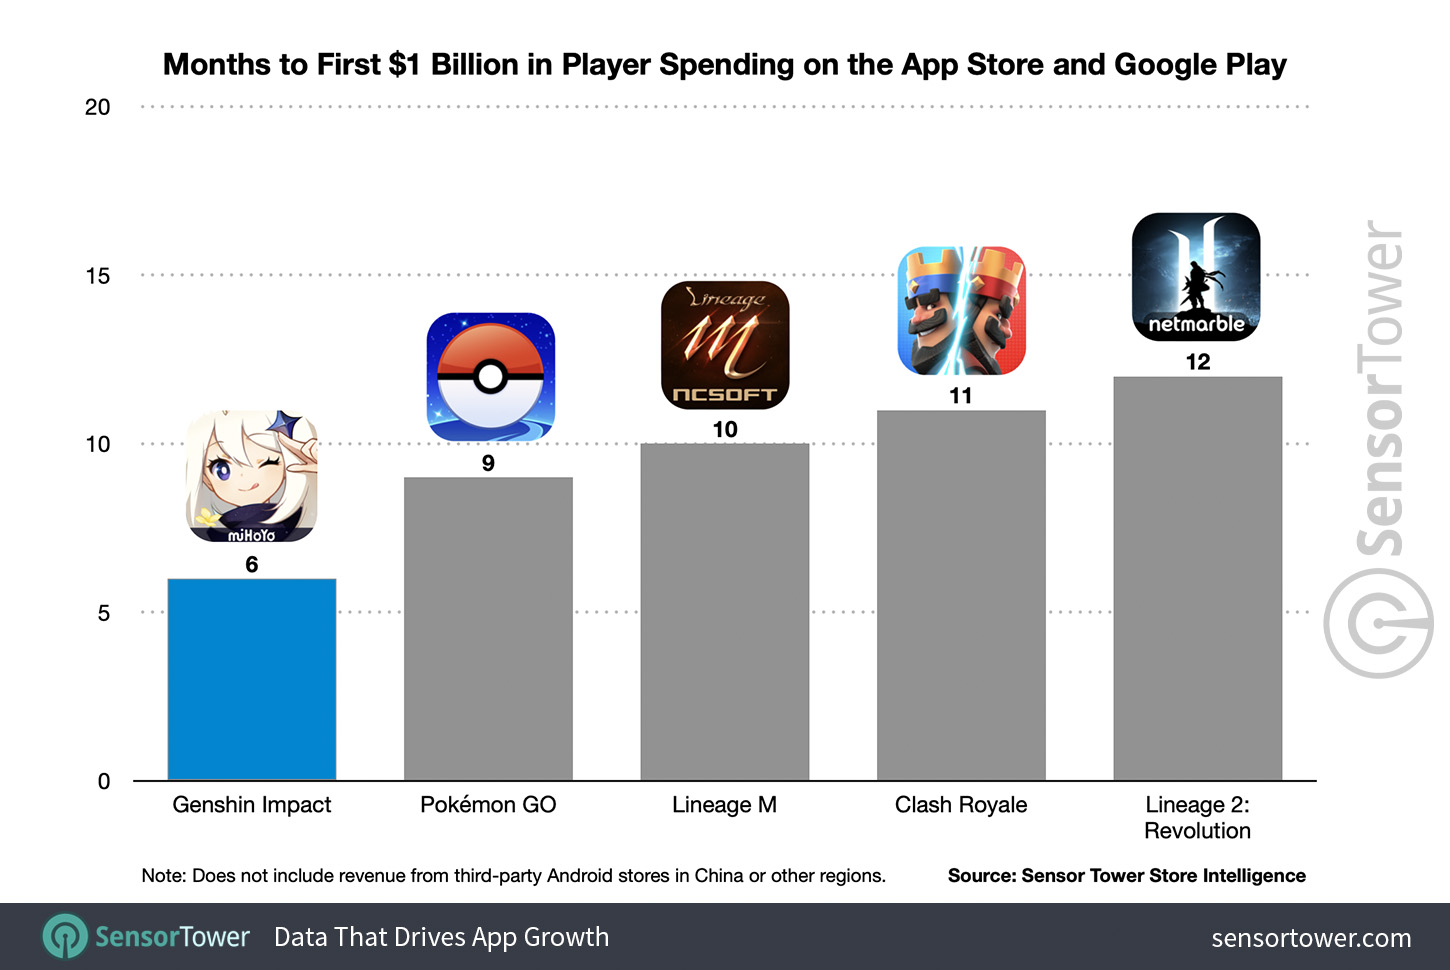 Months to first $1 Billion on the App Store and Google Play